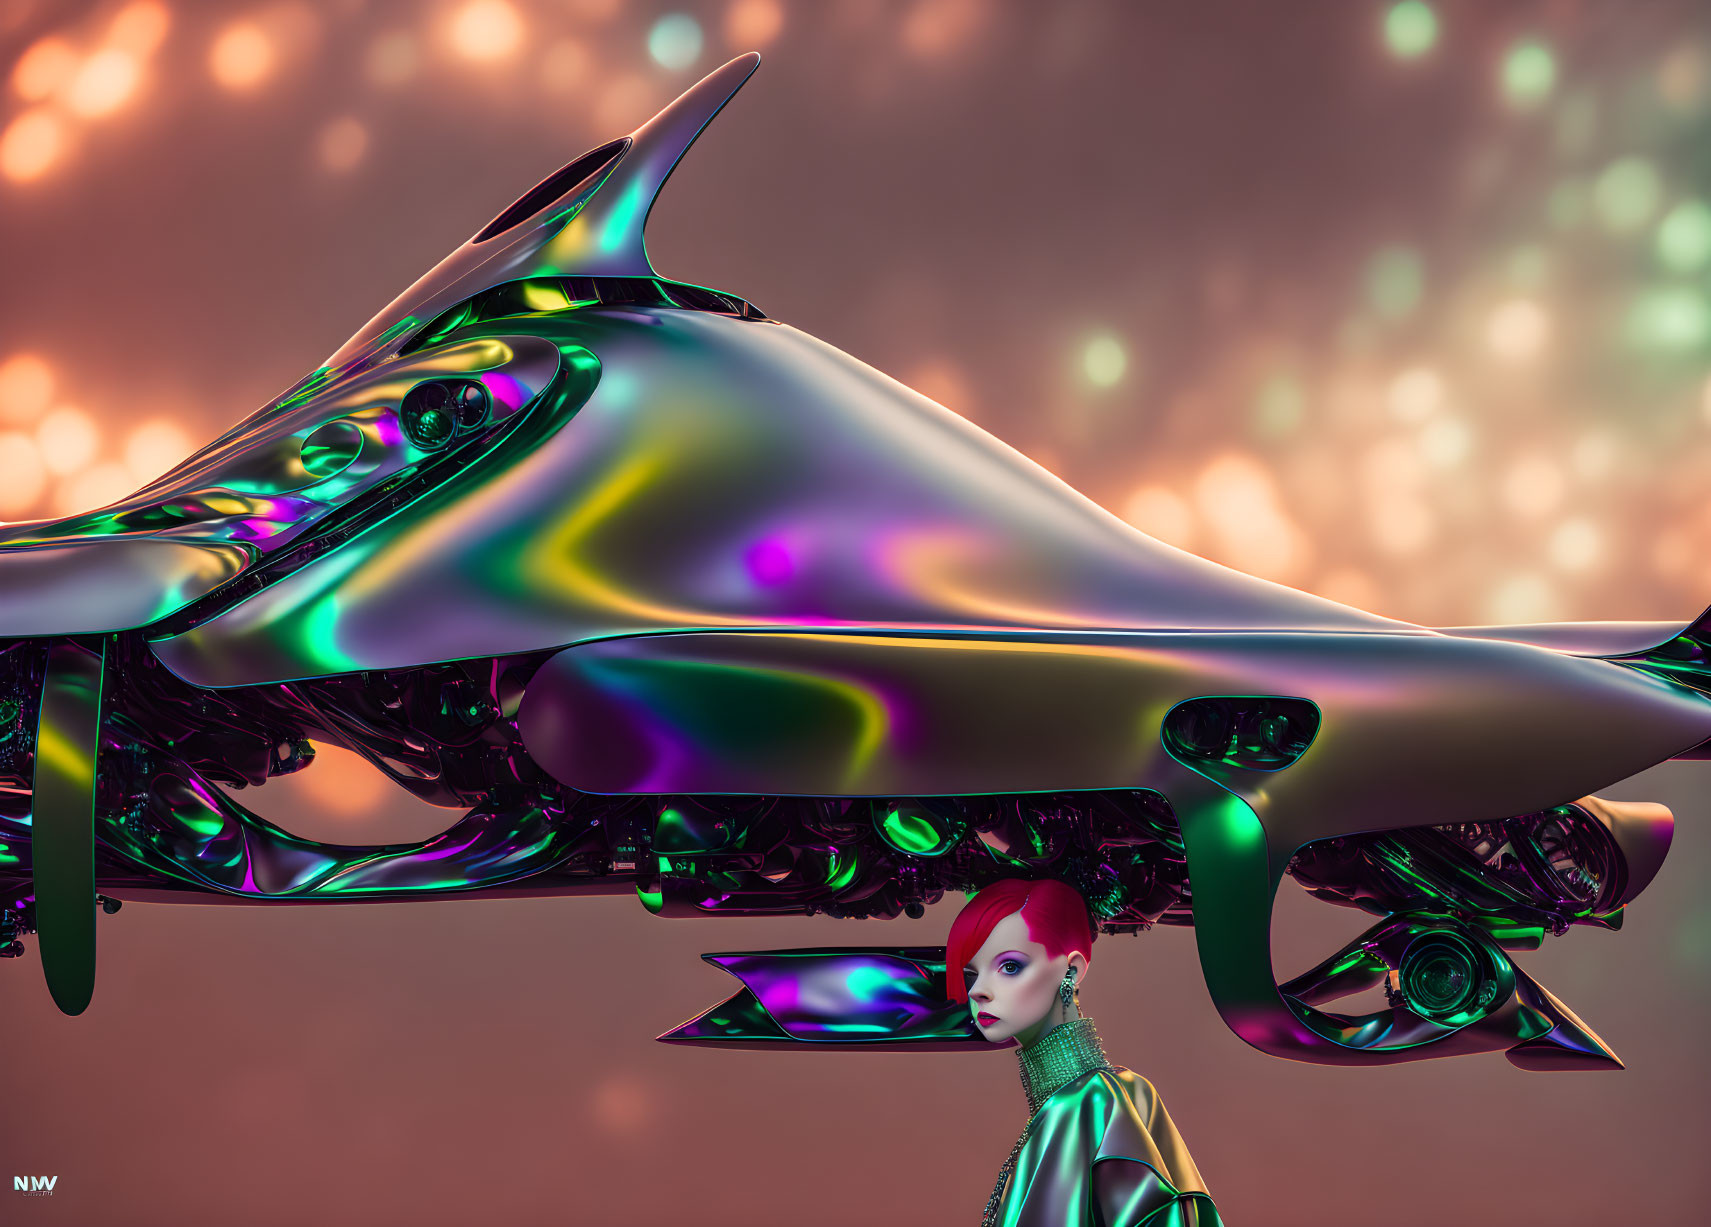 Futuristic chrome vehicle and red-haired model in metallic outfit